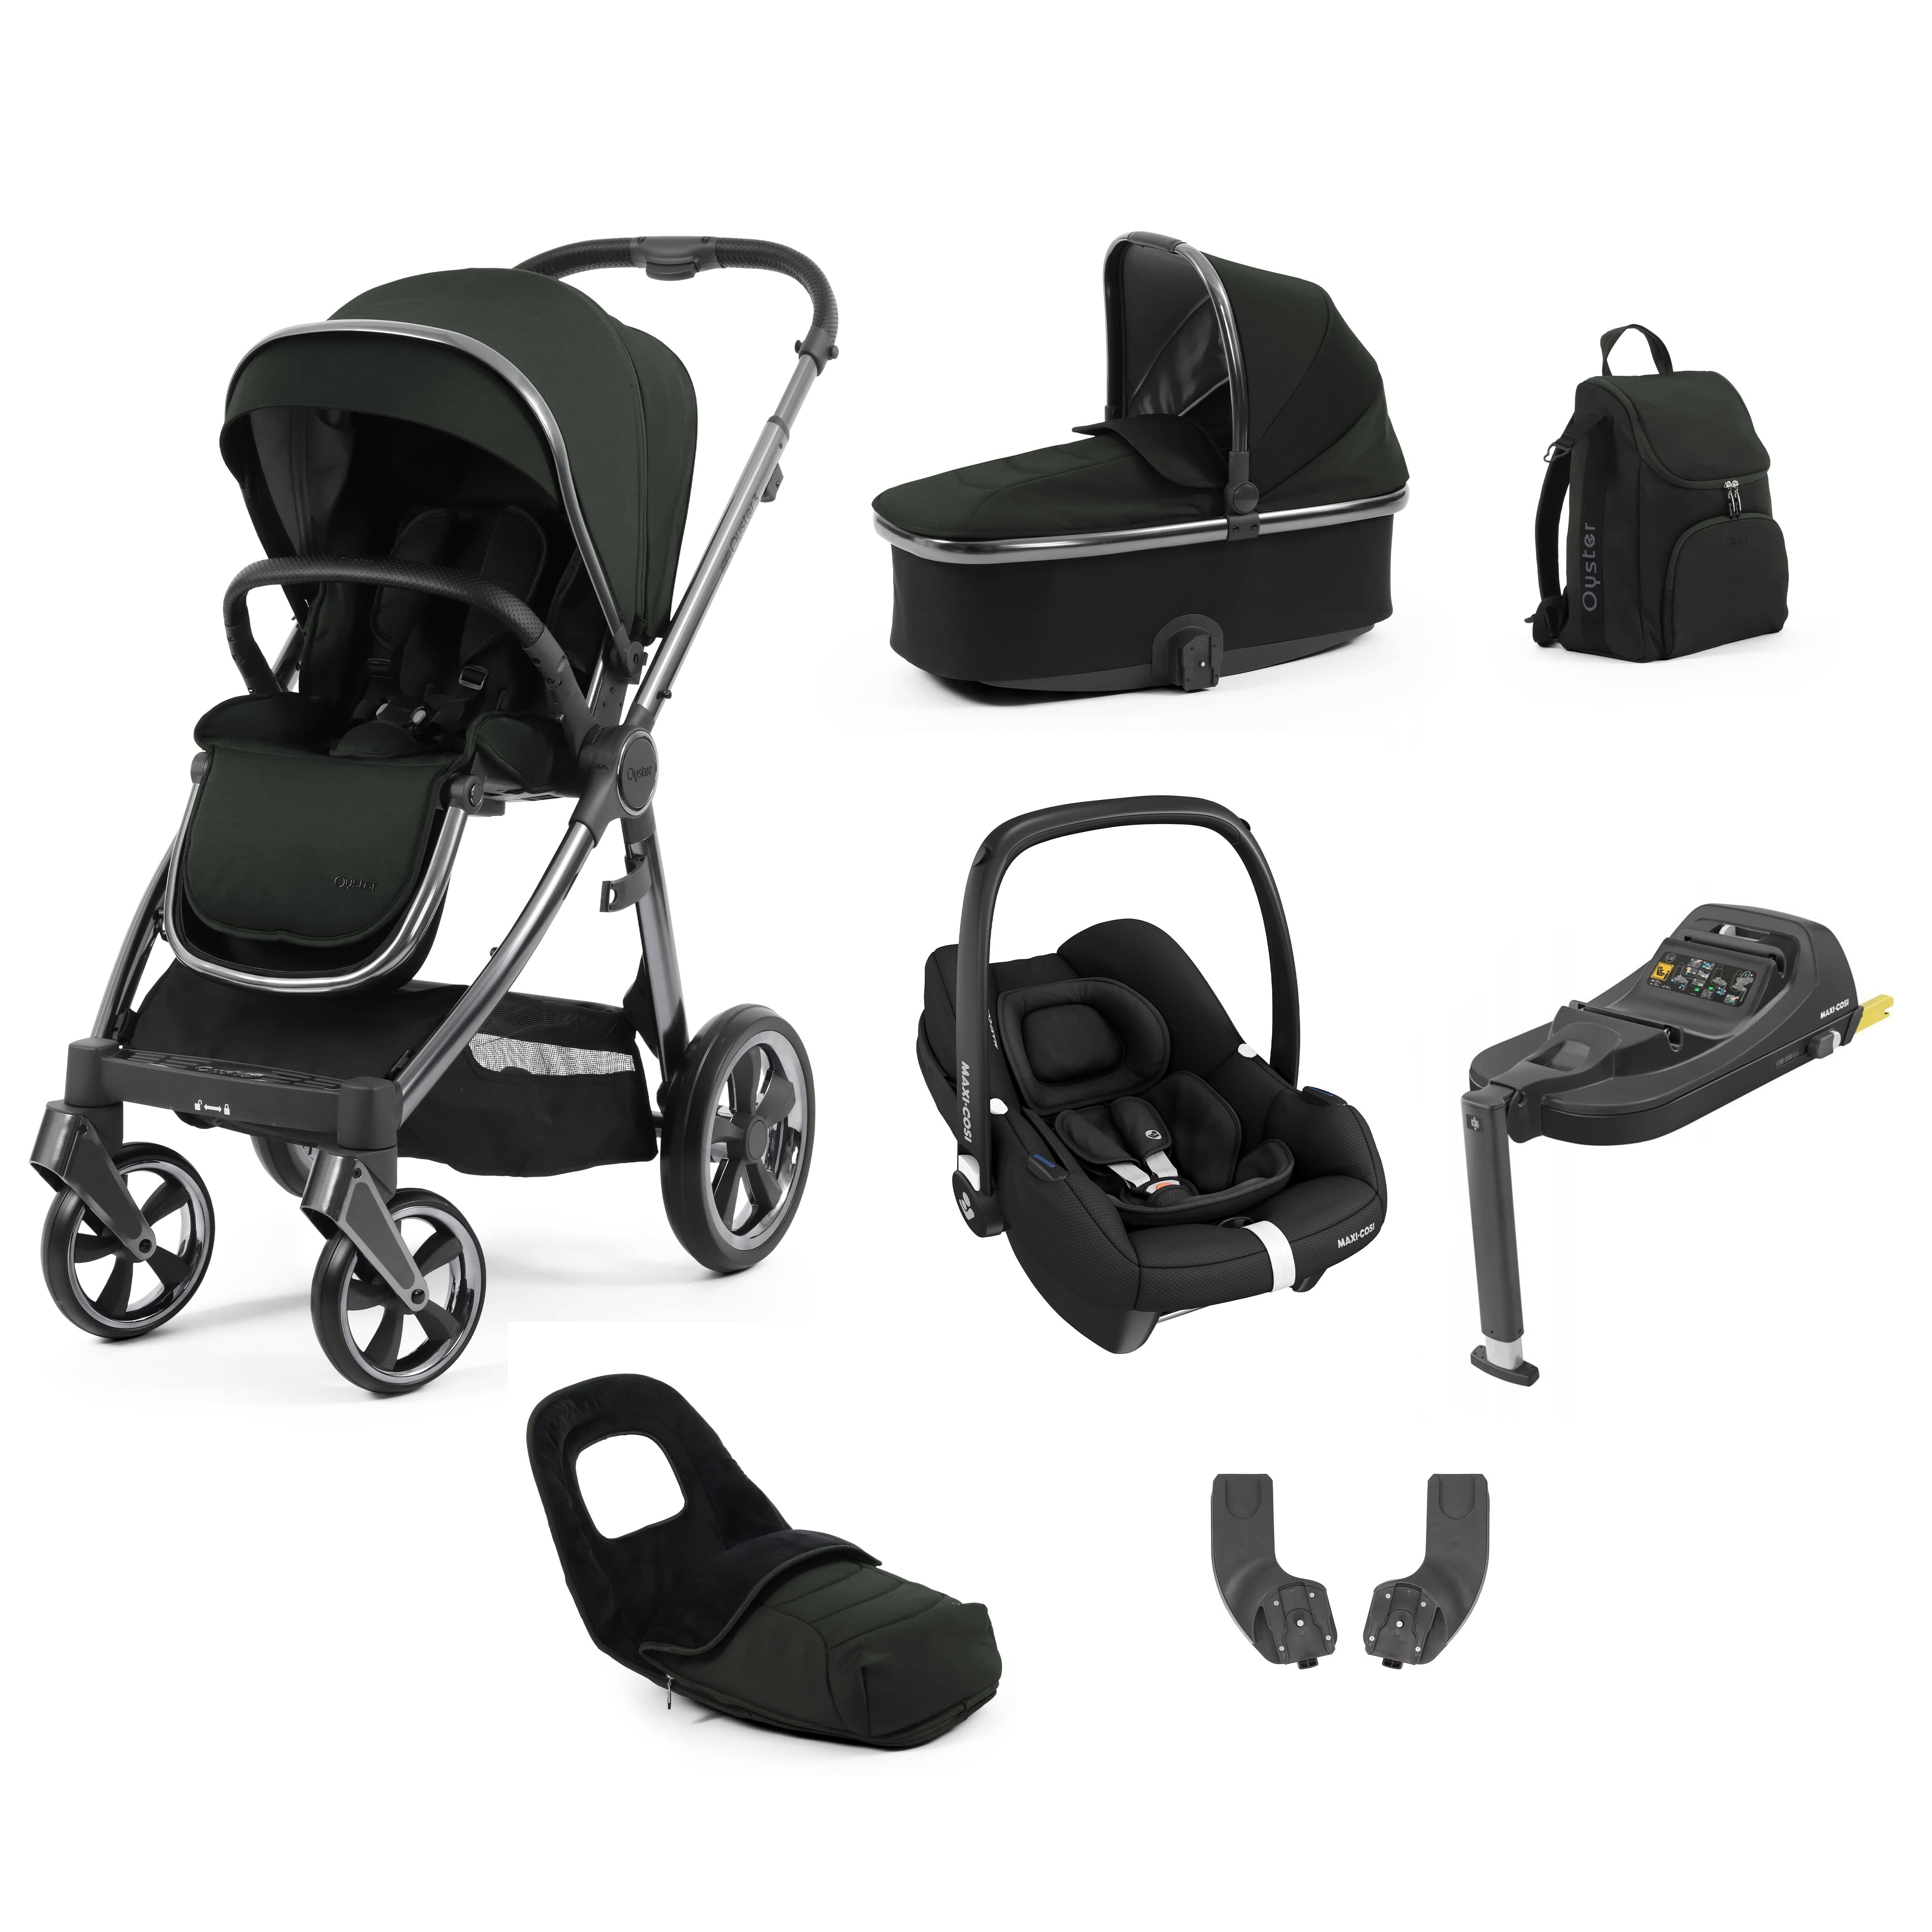 BabyStyle travel systems Babystyle Oyster 3 Luxury 7 Piece with Car Seat Bundle in Black Olive 14810-BLO